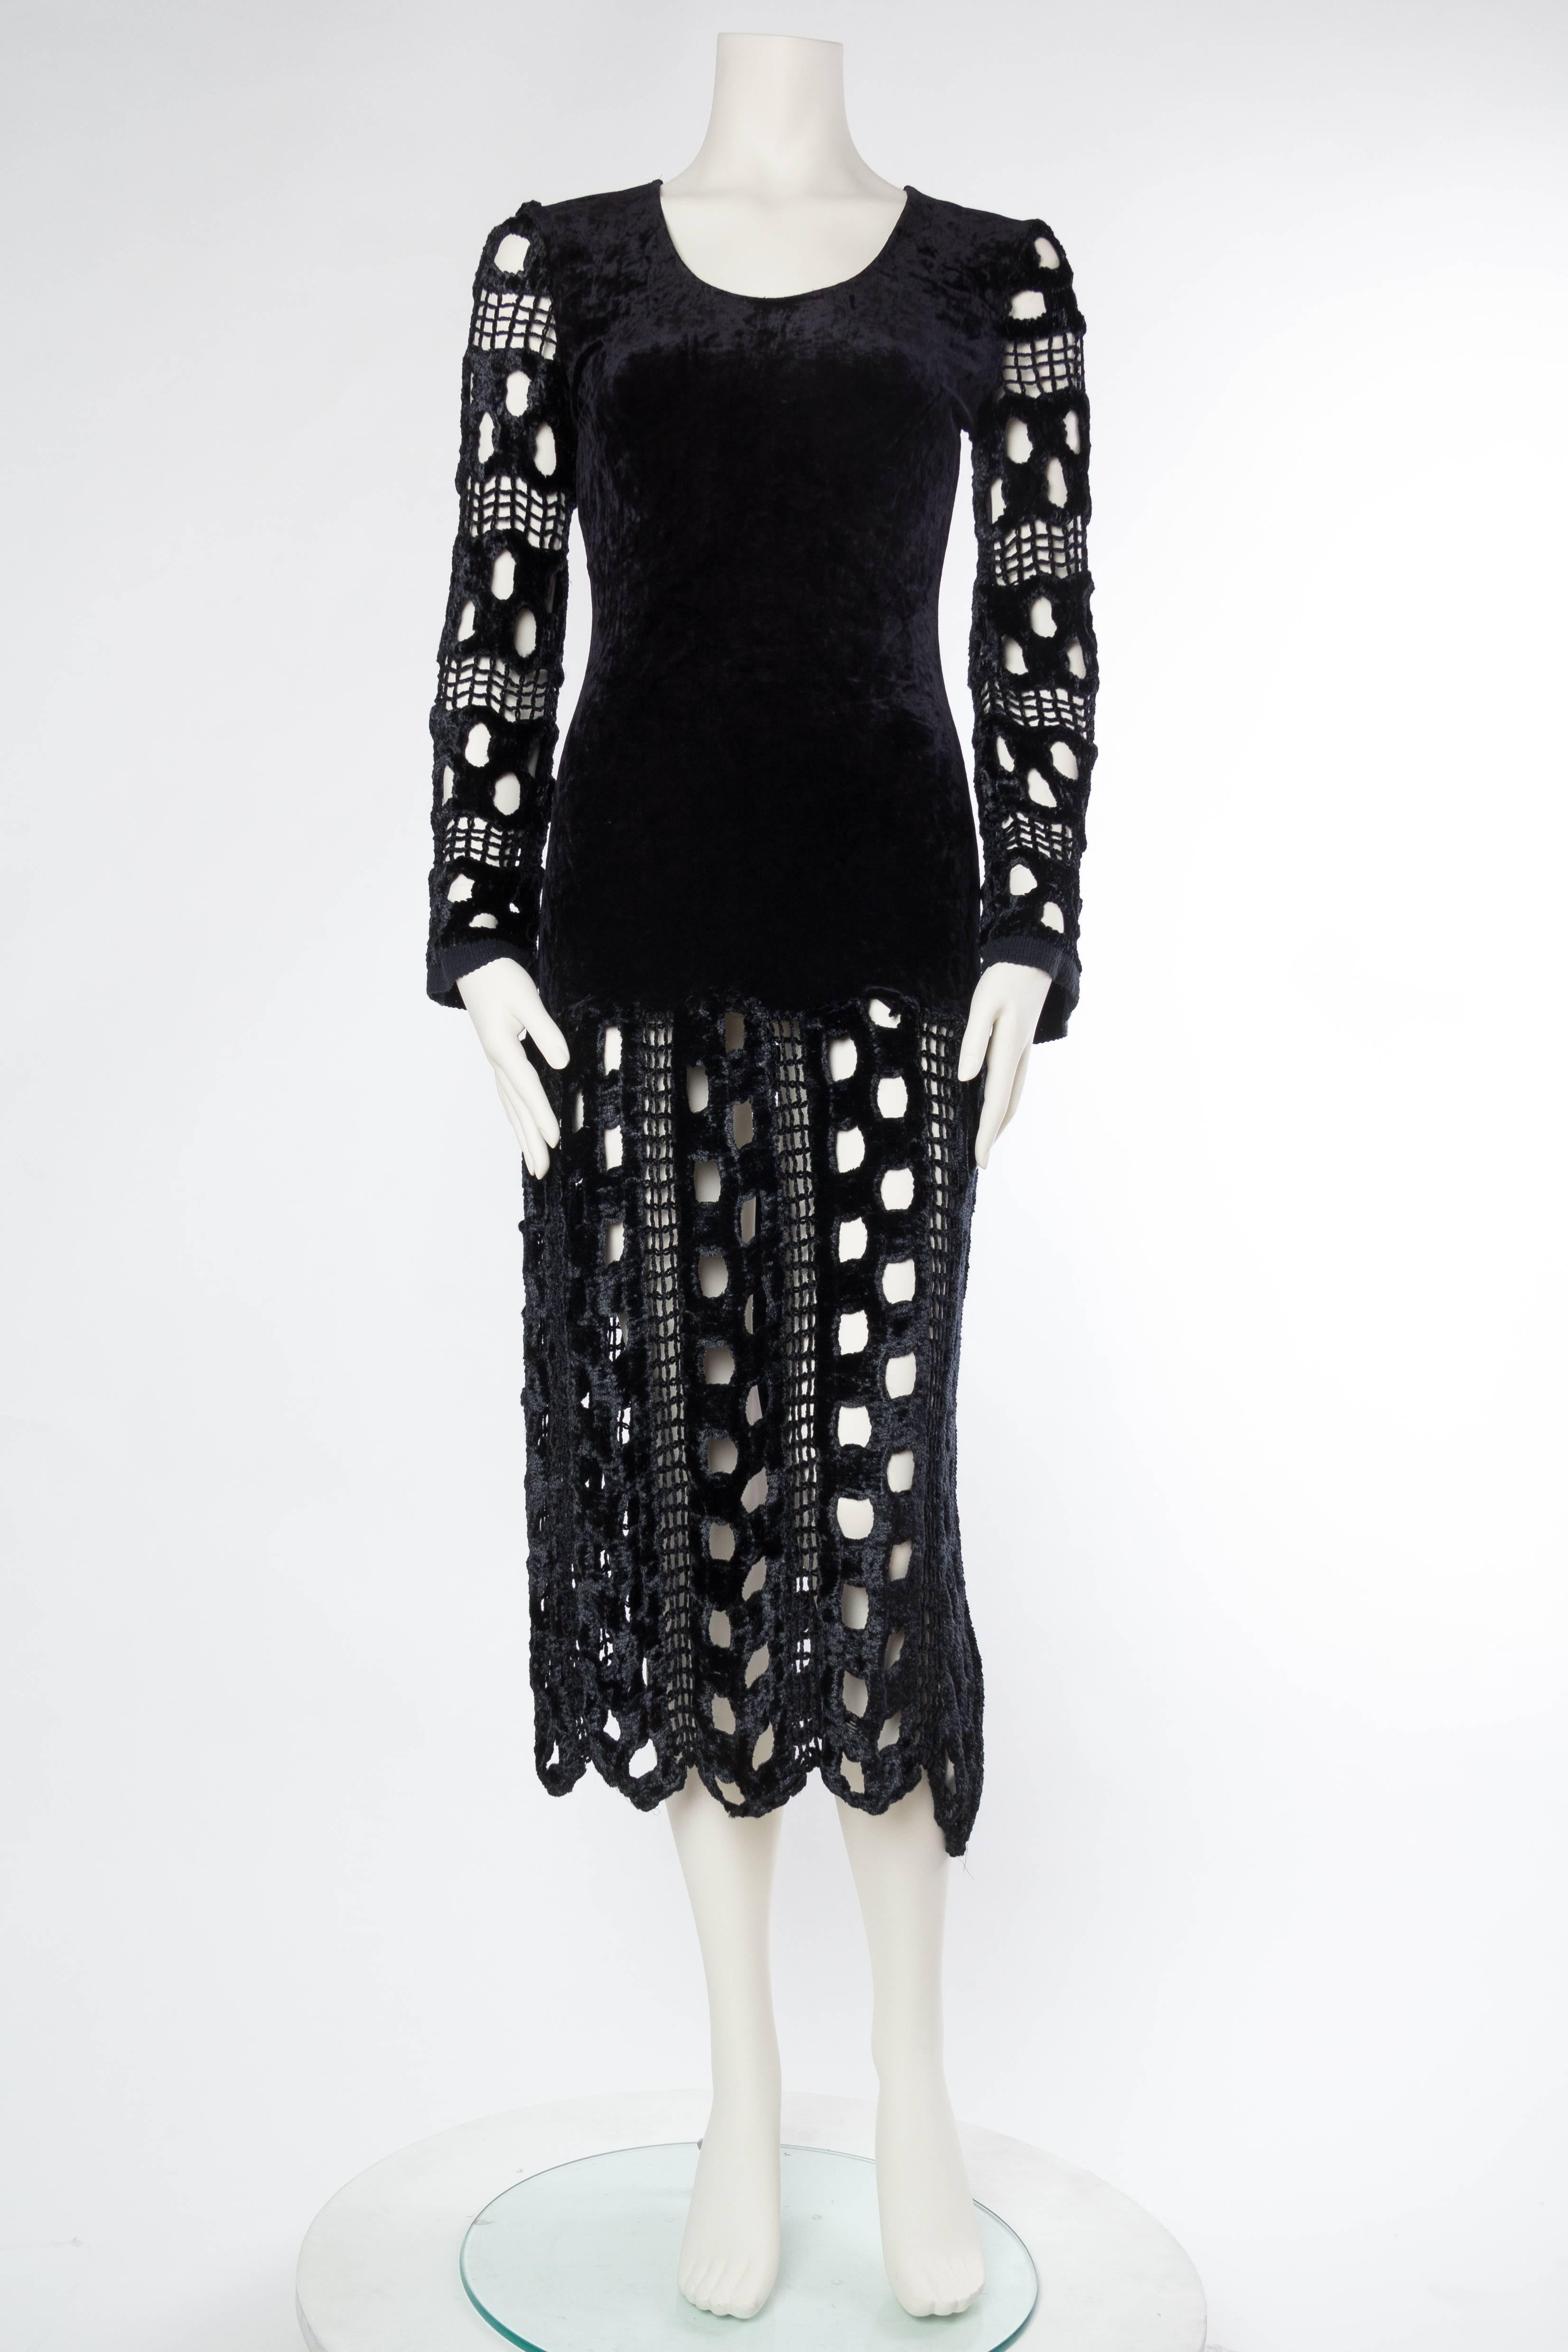 1980s Body-con Stretch Velvet and Crochet Dress in the style of Alaia. Purchased in Paris with no label. 